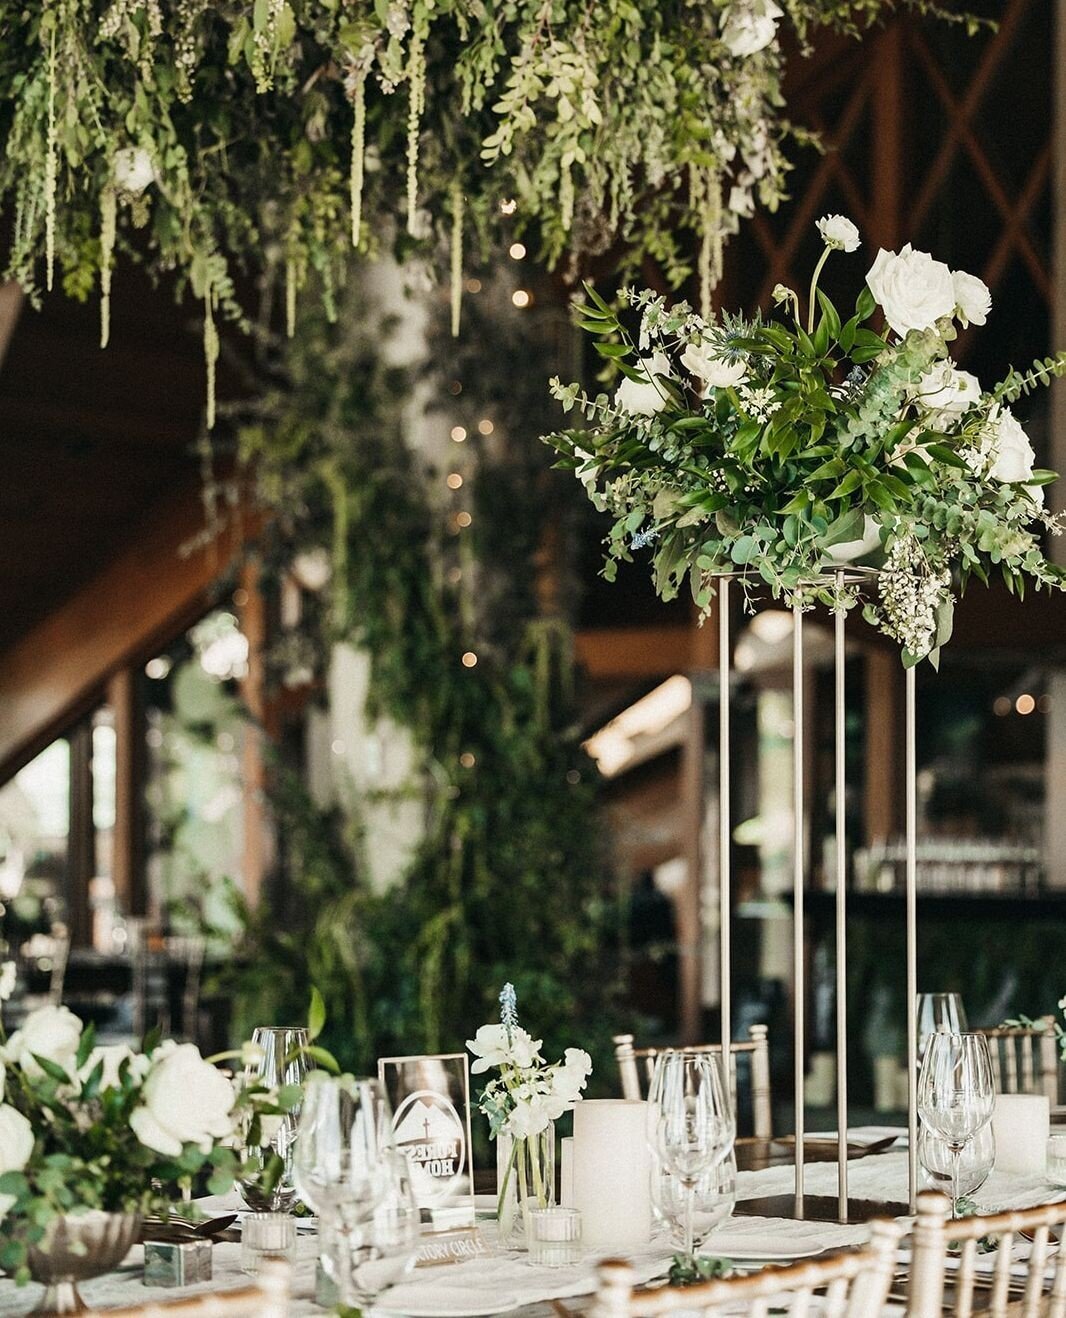 Filling your reception space with lush greenery and transforming into a world out of the one we know is something we highly recommend almost no matter what your venue is. ⁠
.⁠
Planner: @beauandarroweventco⁠
Catering: @edgewoodtahoe⁠
Cake/Dessert: @fl